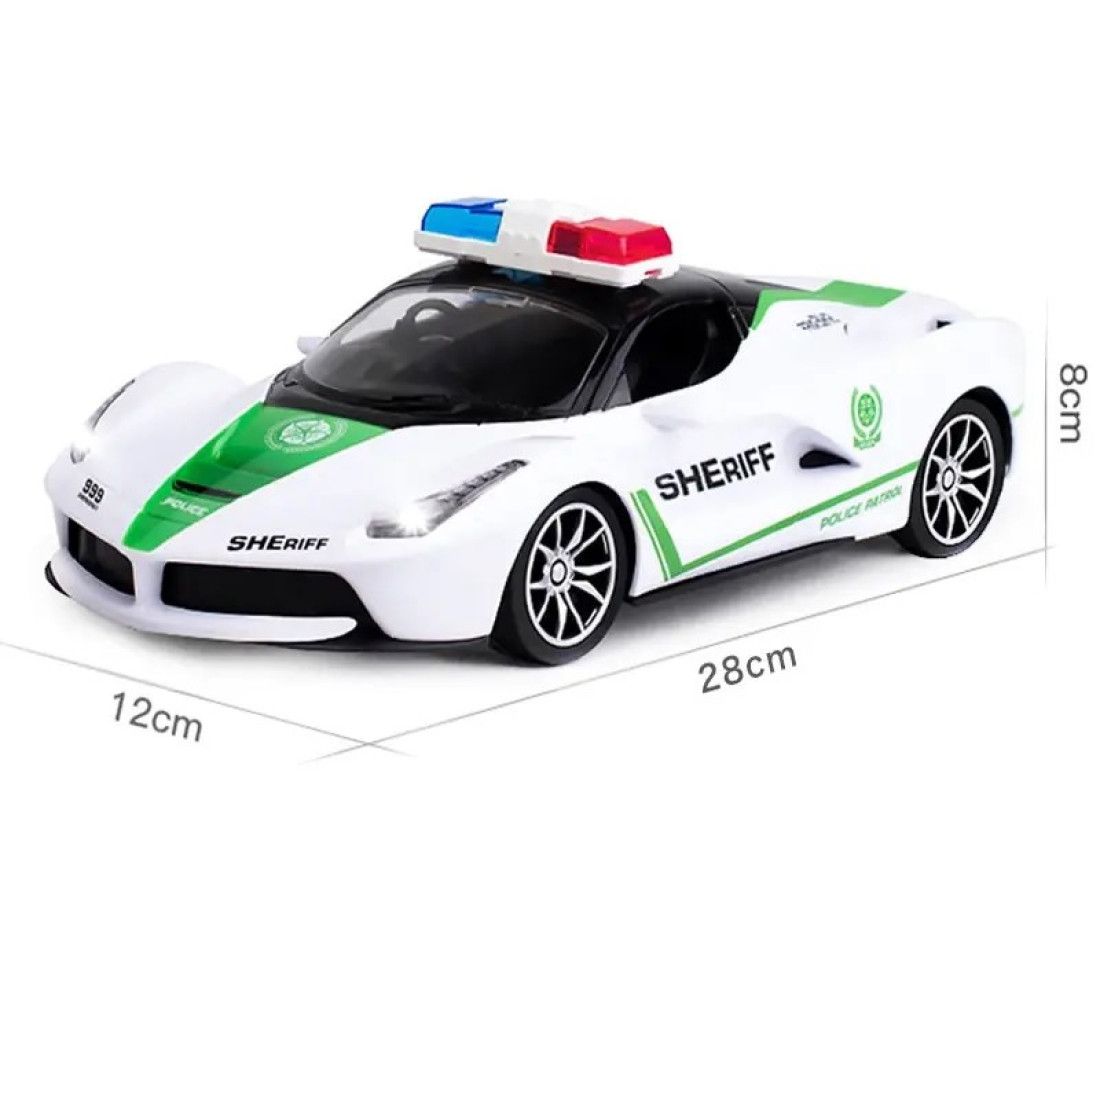 Remote Controlled (RC) Police Car